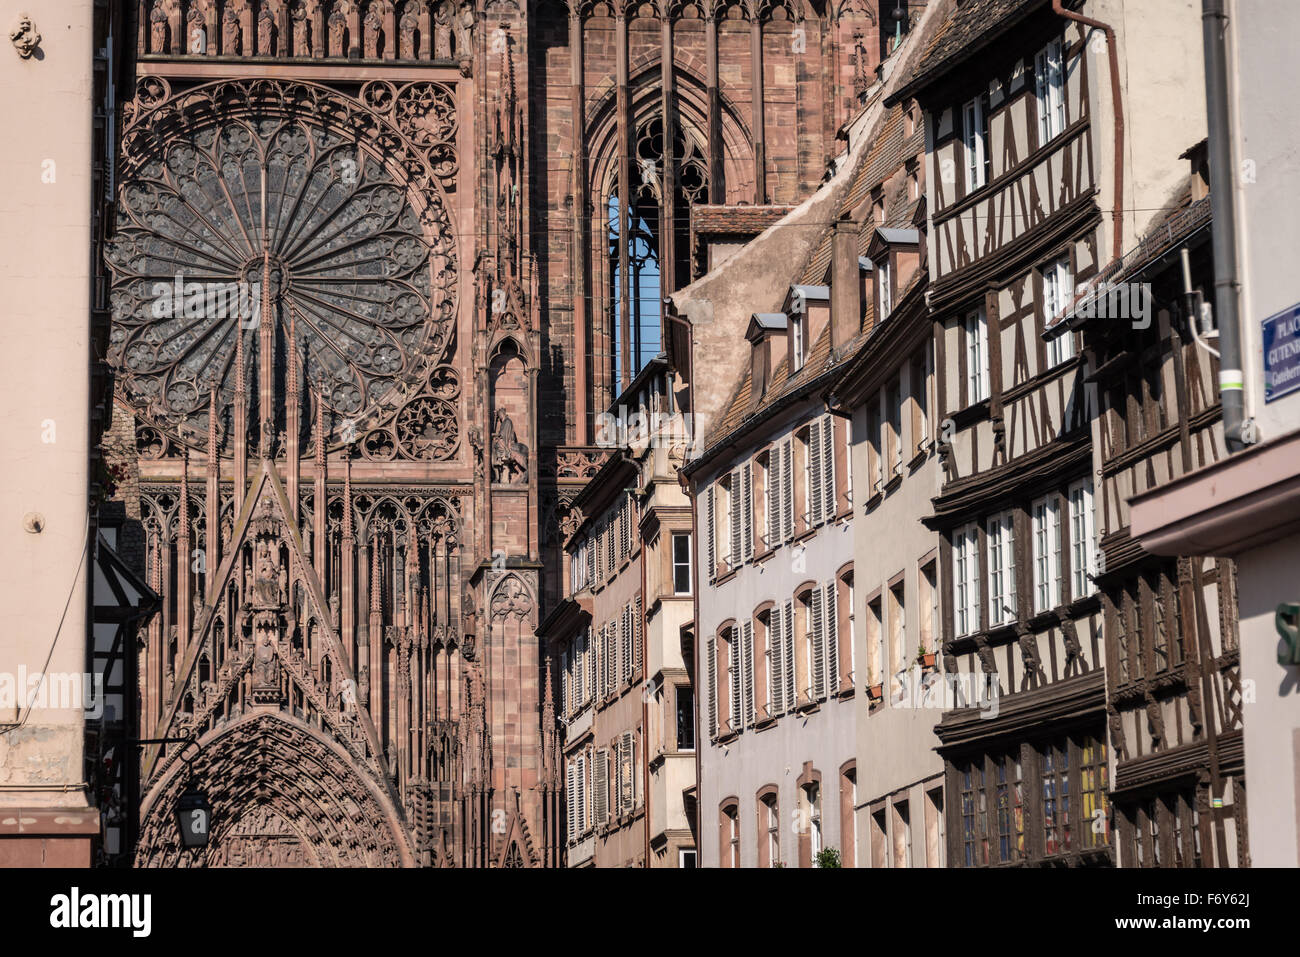 Cathedral of Our Lady of Strasbourg, Alsace, France Stock Photo